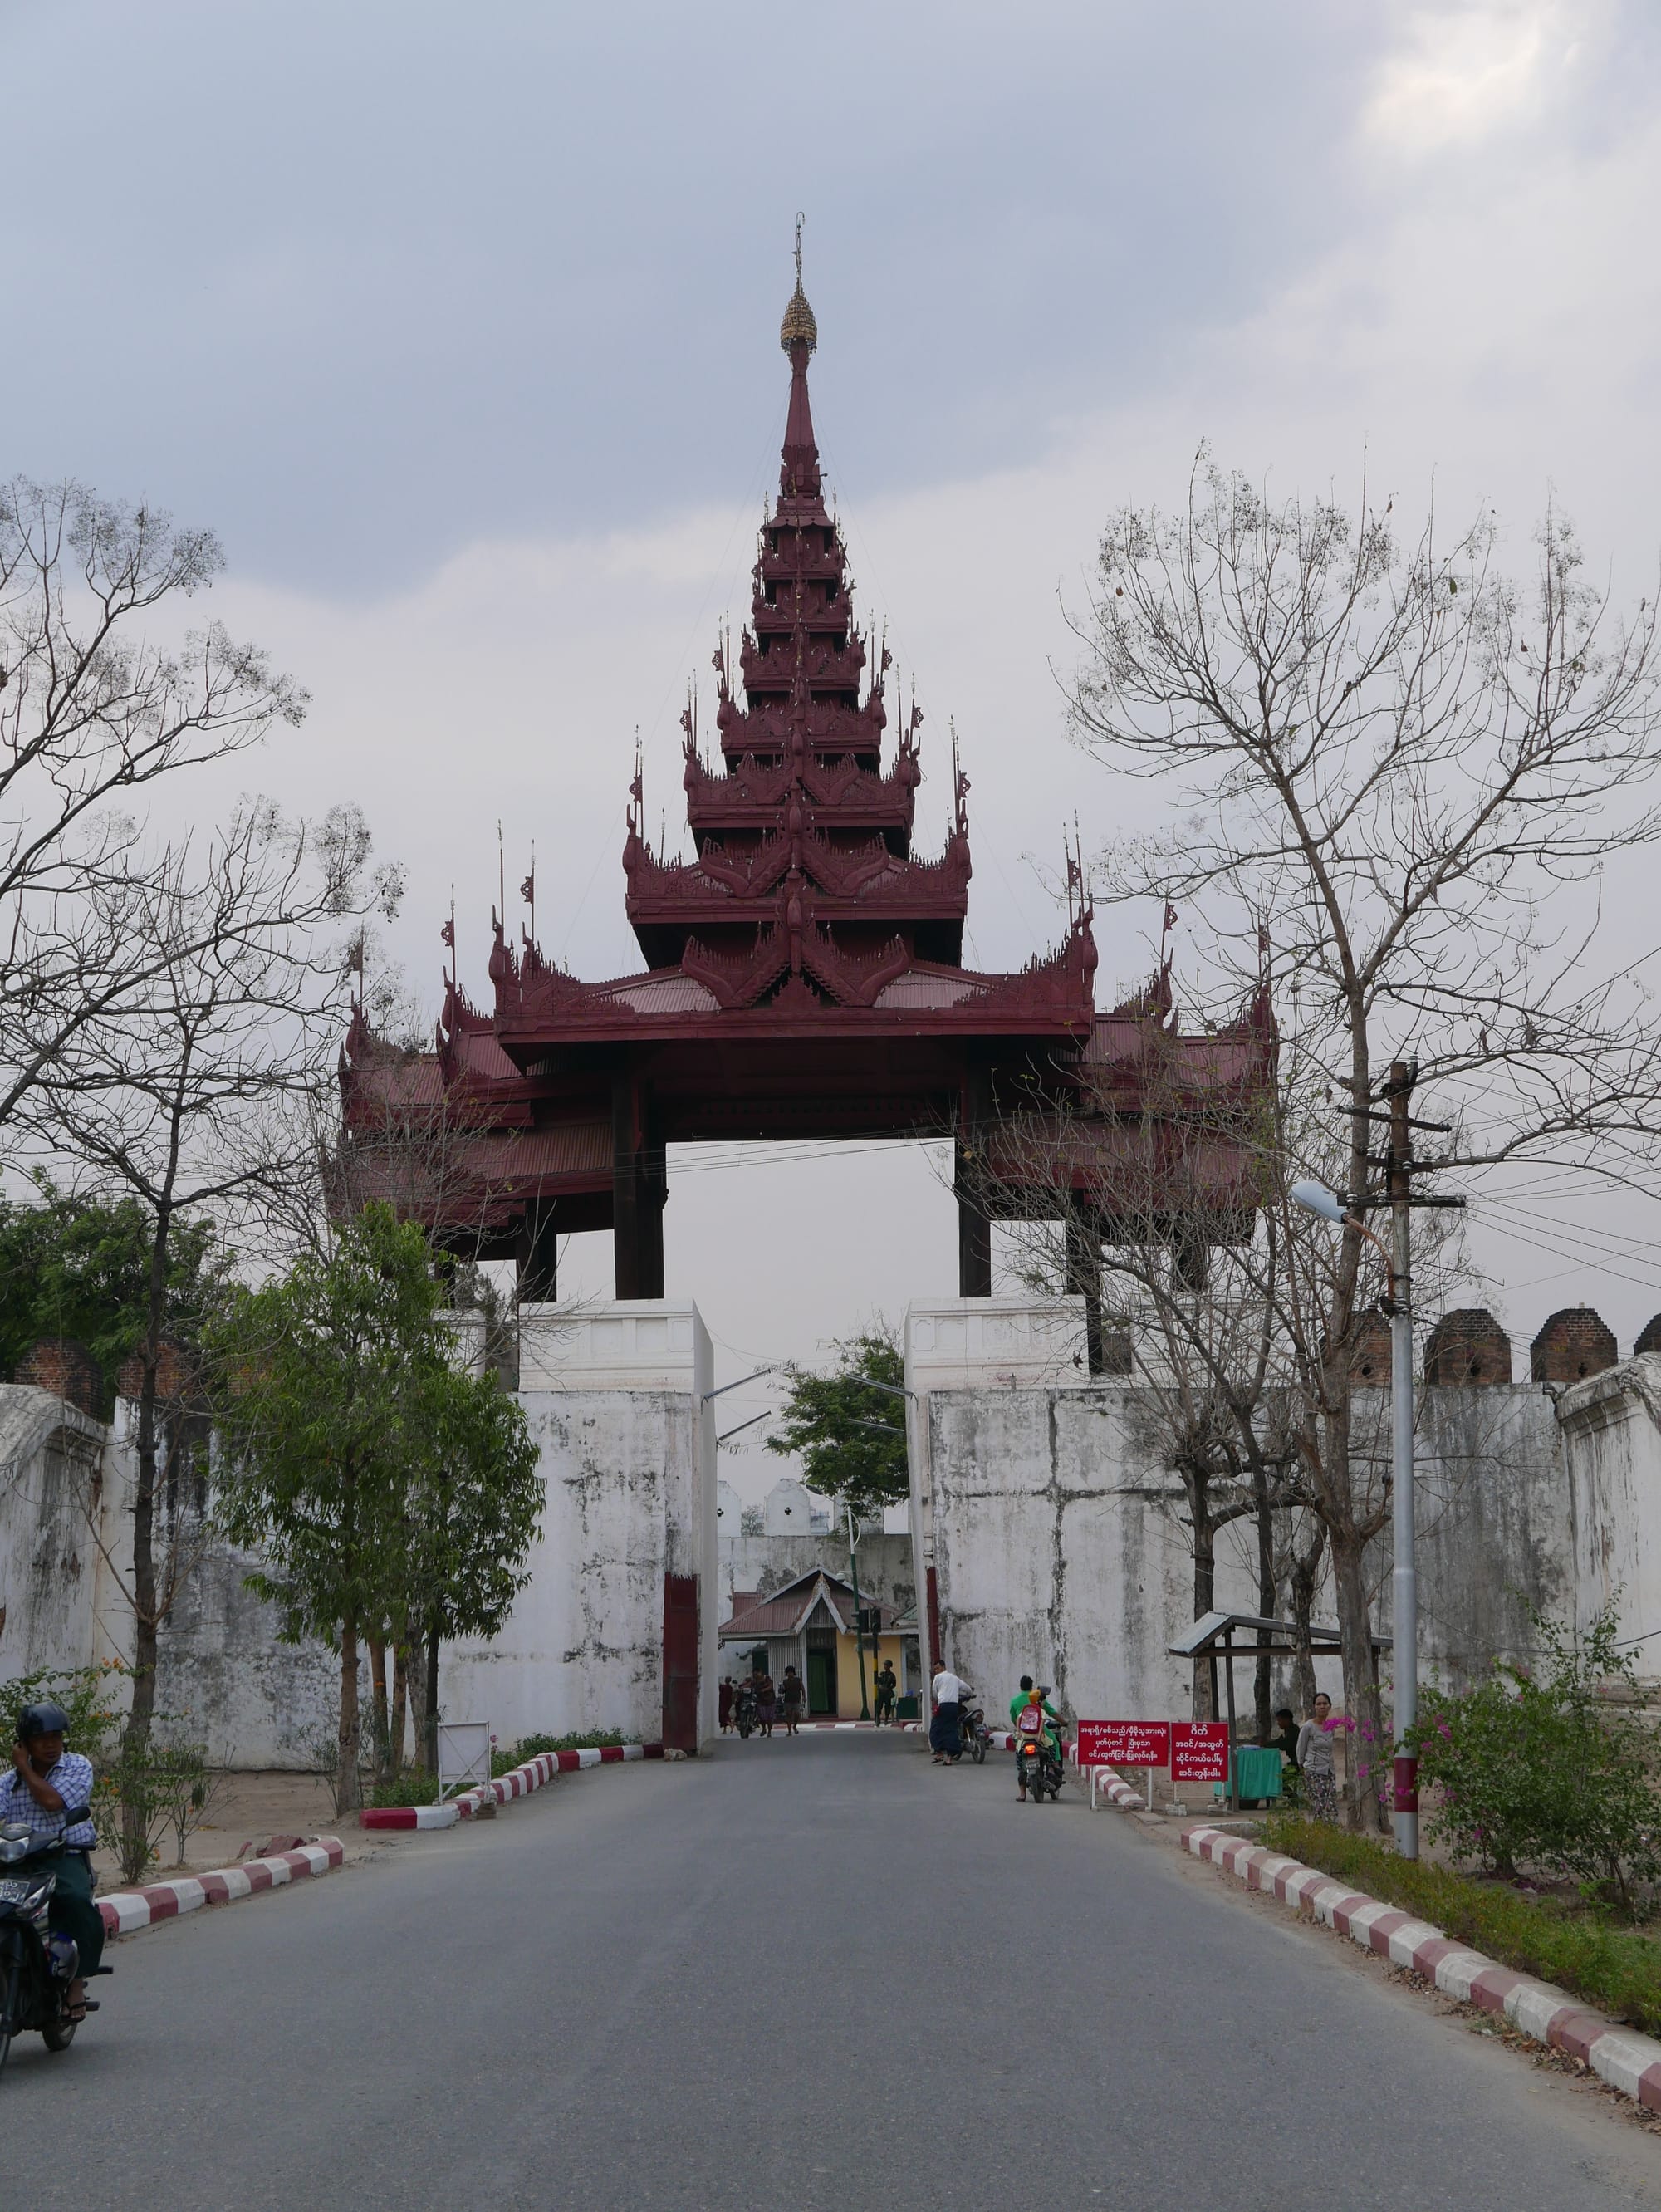 Photo by Author — architecture of the main gate at Mandalay Grand Royal Palace